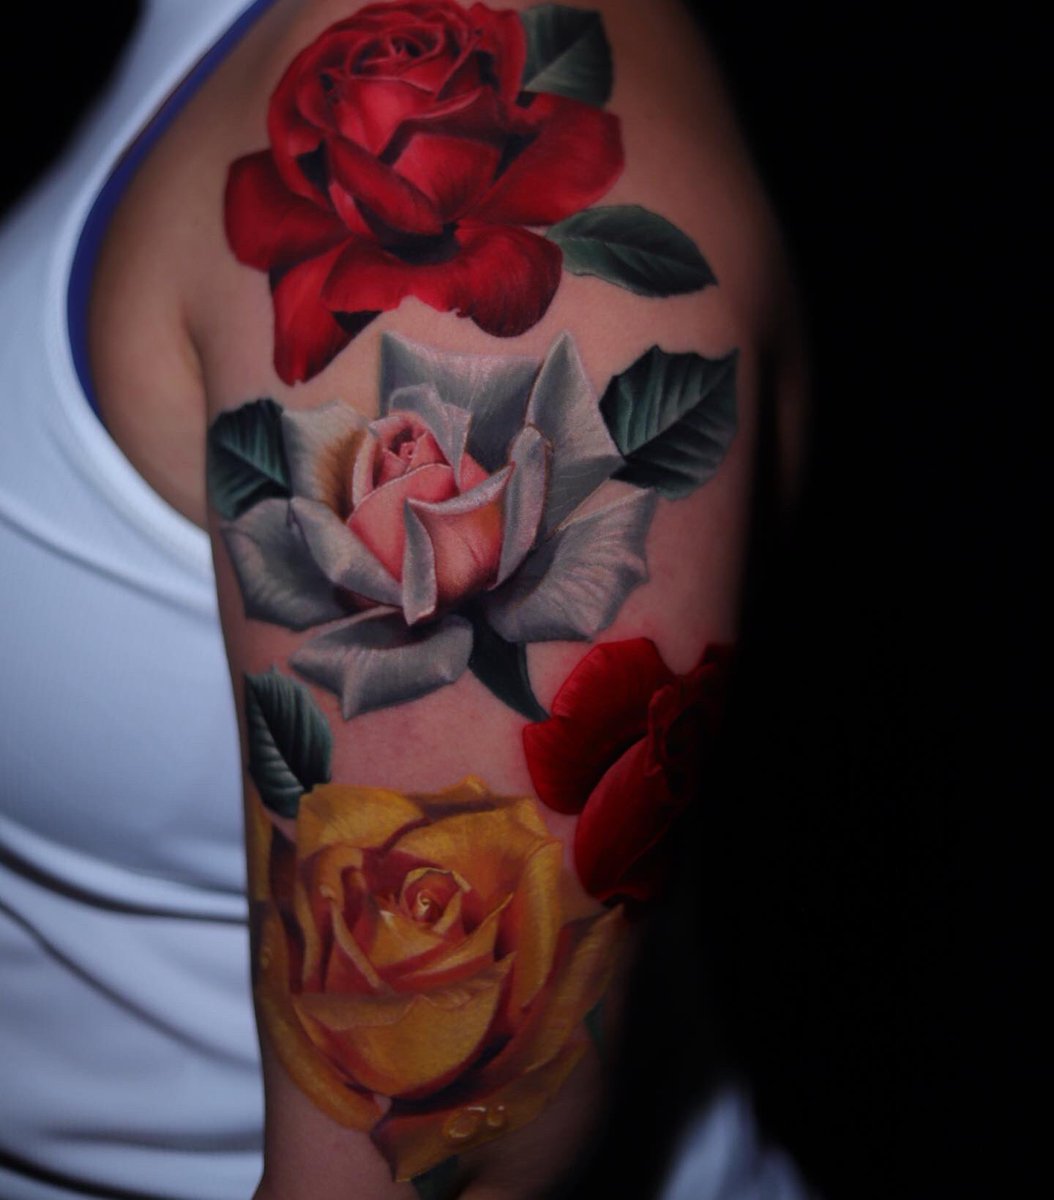 All roses are healed except for the smaller one on the back of the arm. Swipe to see more angles😀 #rosetattoo #floraltattoo #losangelestattooartist